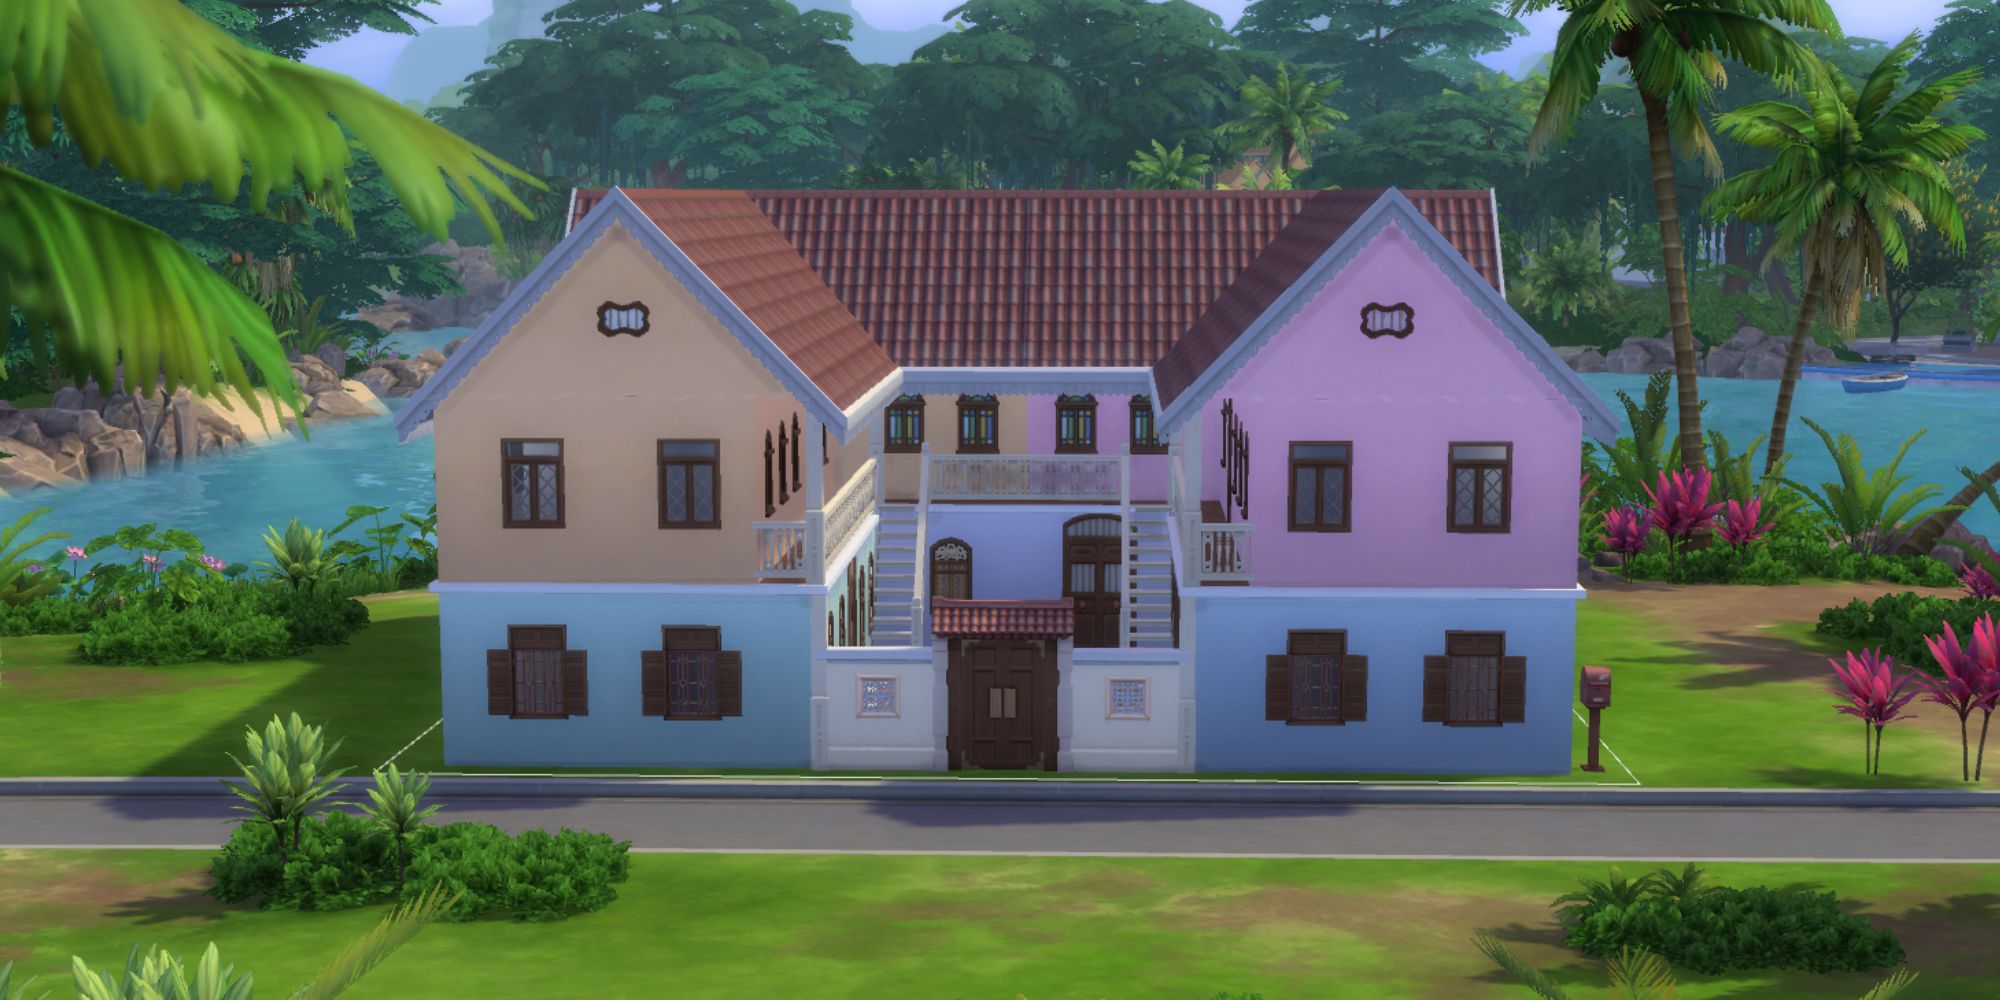 Sims 4 for rent unmarked rentals walk up